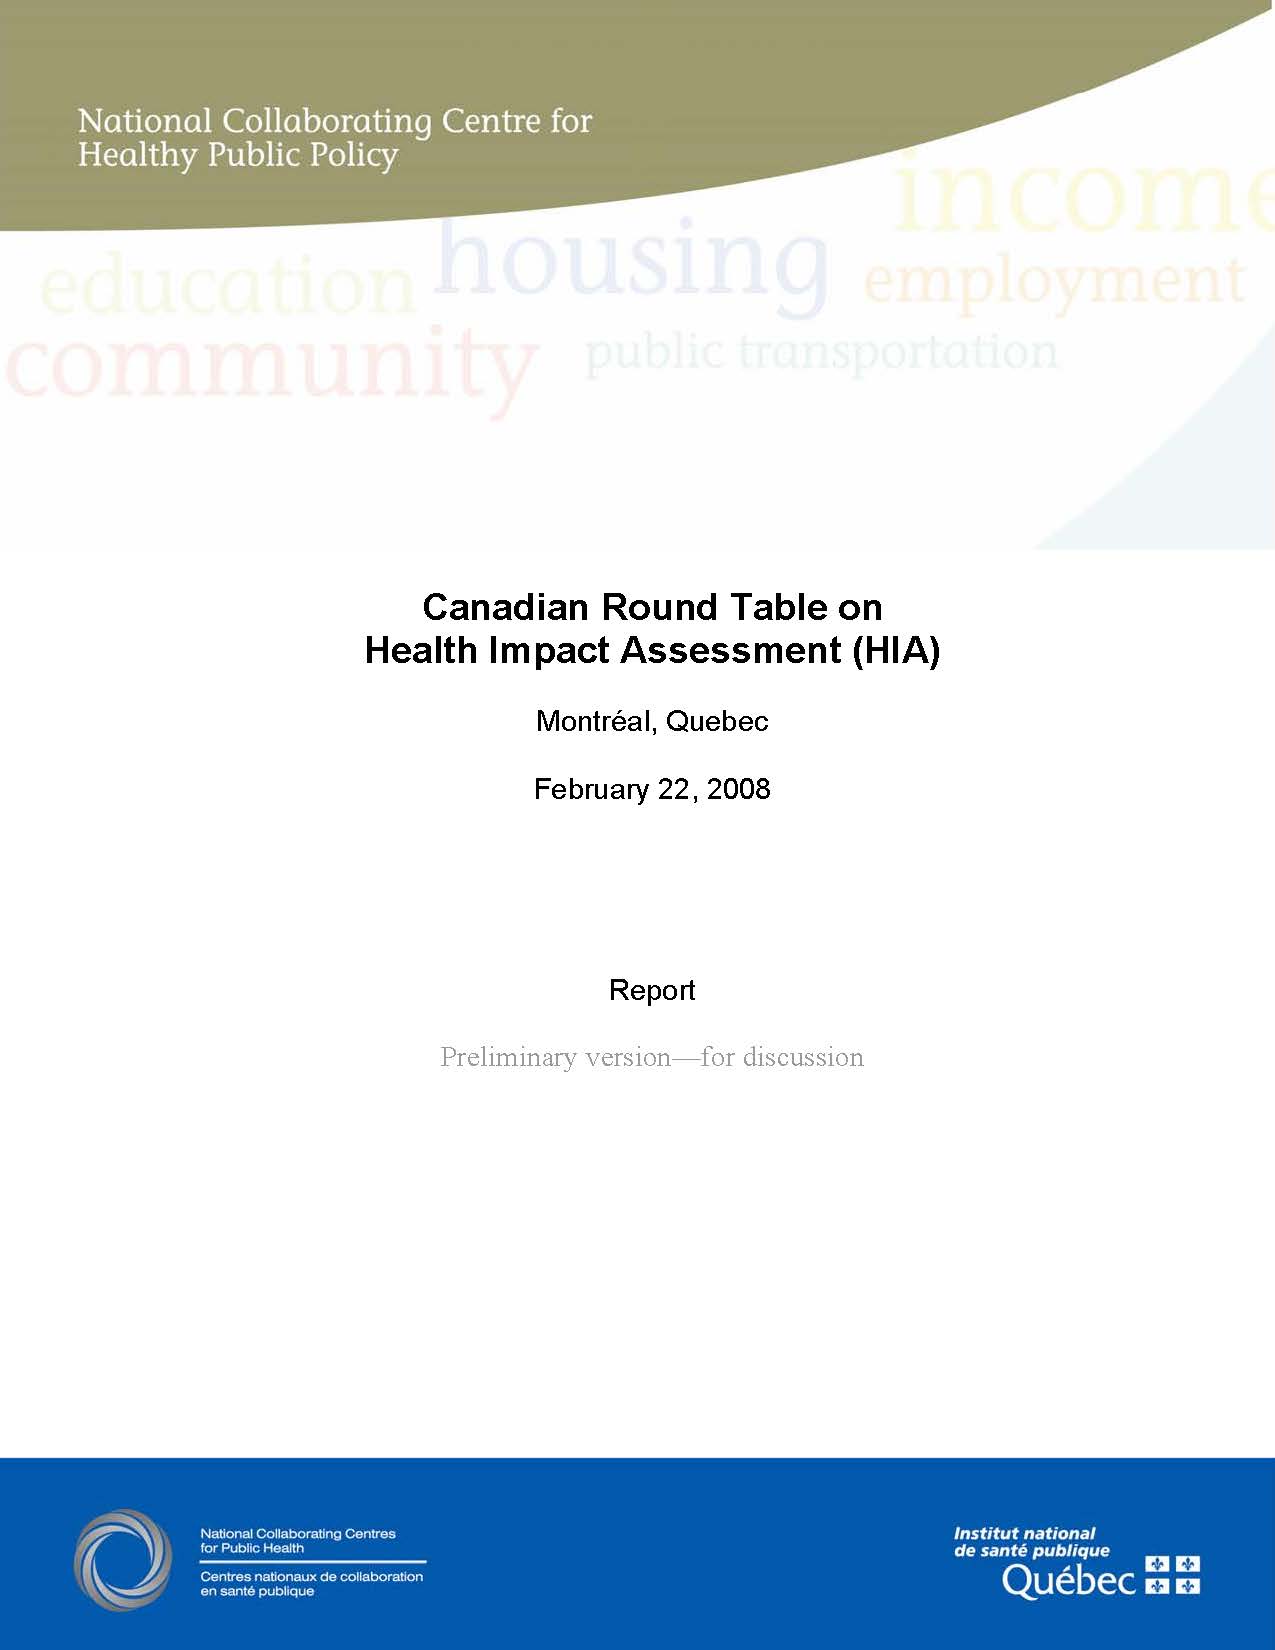 Report on the Canadian Roundtable on Health Impact Assesment (HIA)